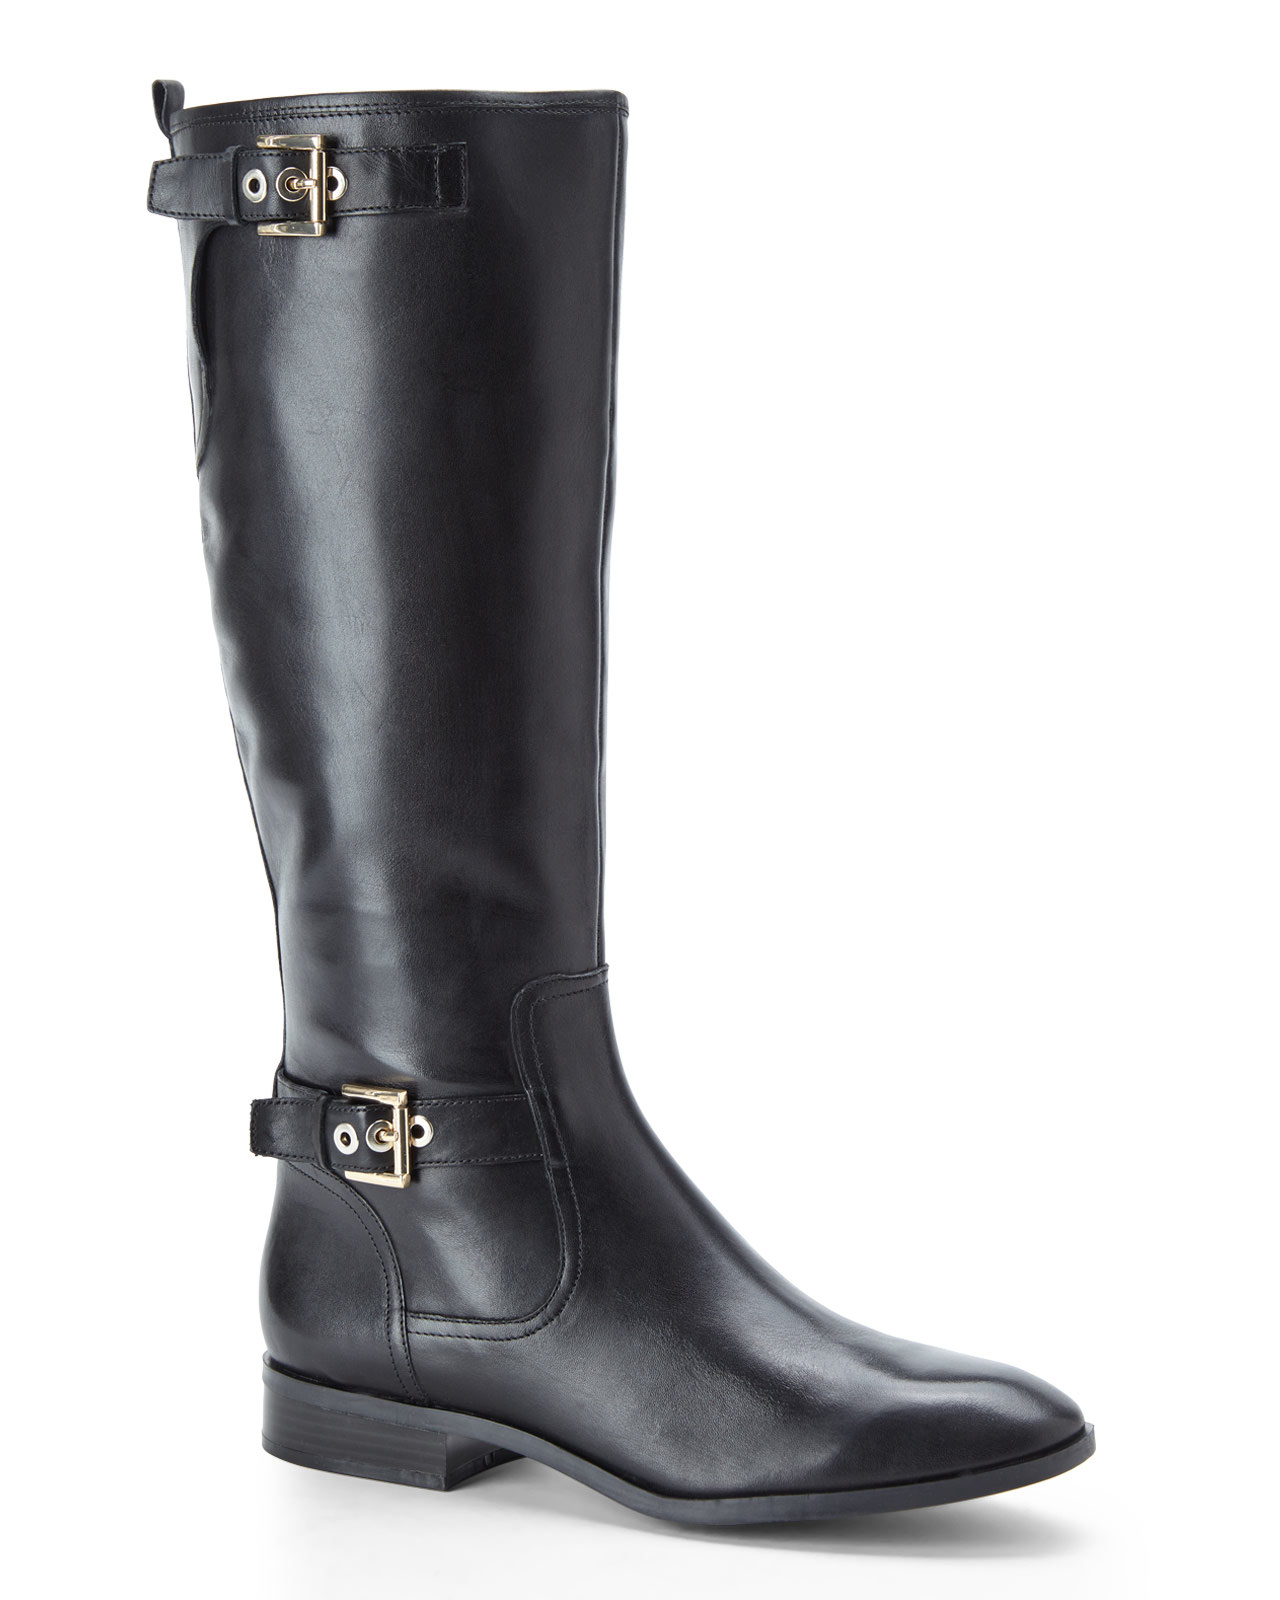 Nine West Black Bring It Riding Boots in Black | Lyst